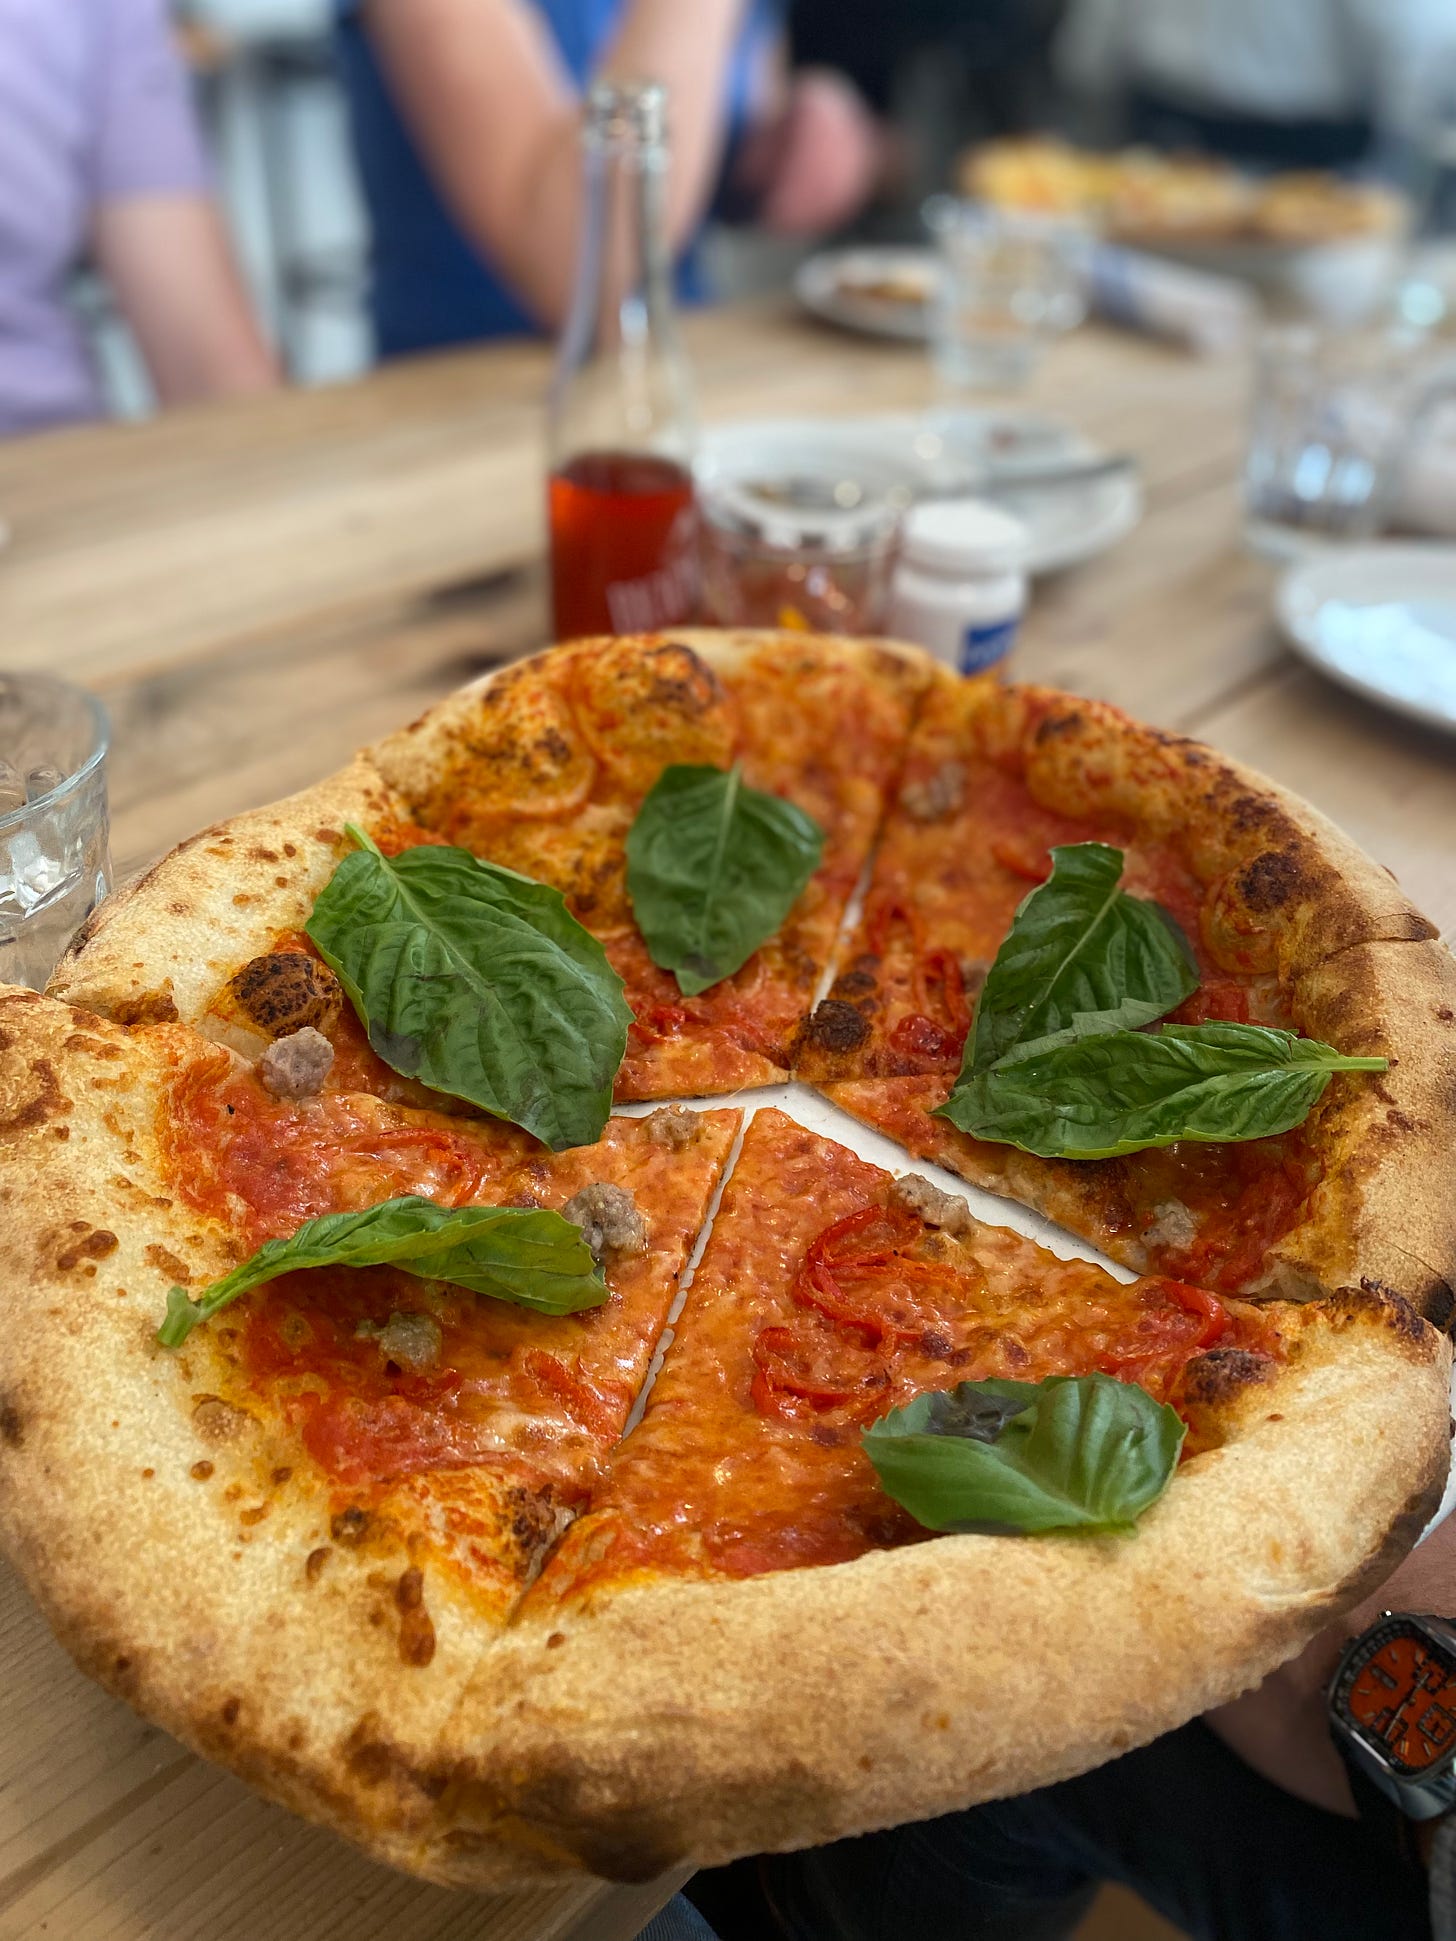 A wood-fired Italian pizza with sausage, peppers, and large basil leaves. In the background is a small bottle half-full of a red bicicletta cocktail, and a glass beside it holds the other half.